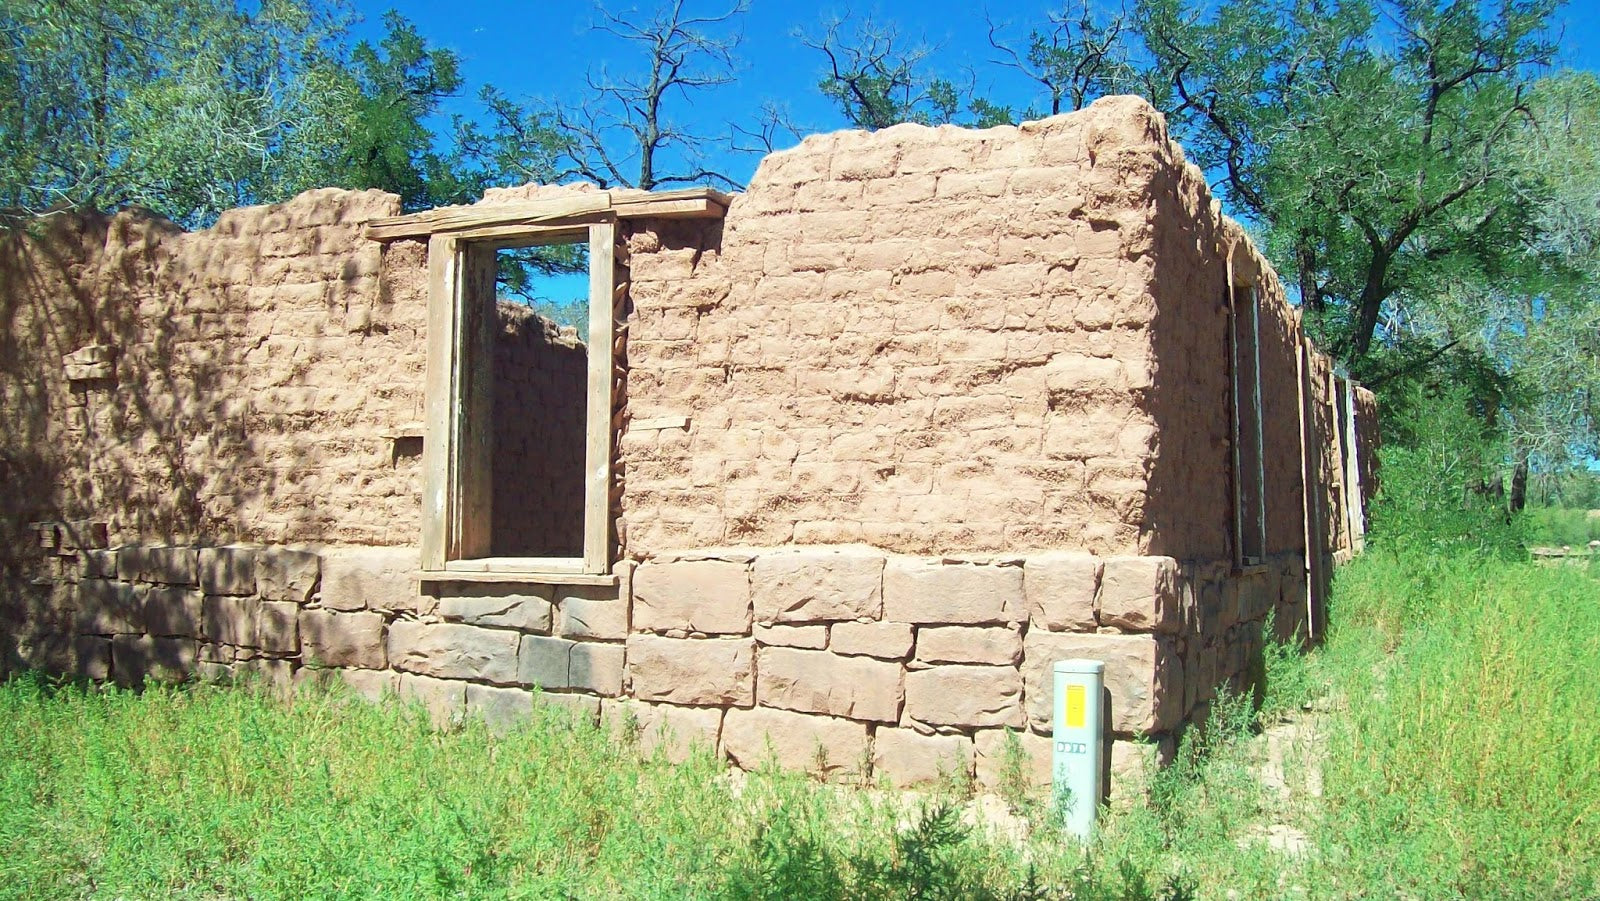 Trip to Zuni - Image of an Abandoned adobe